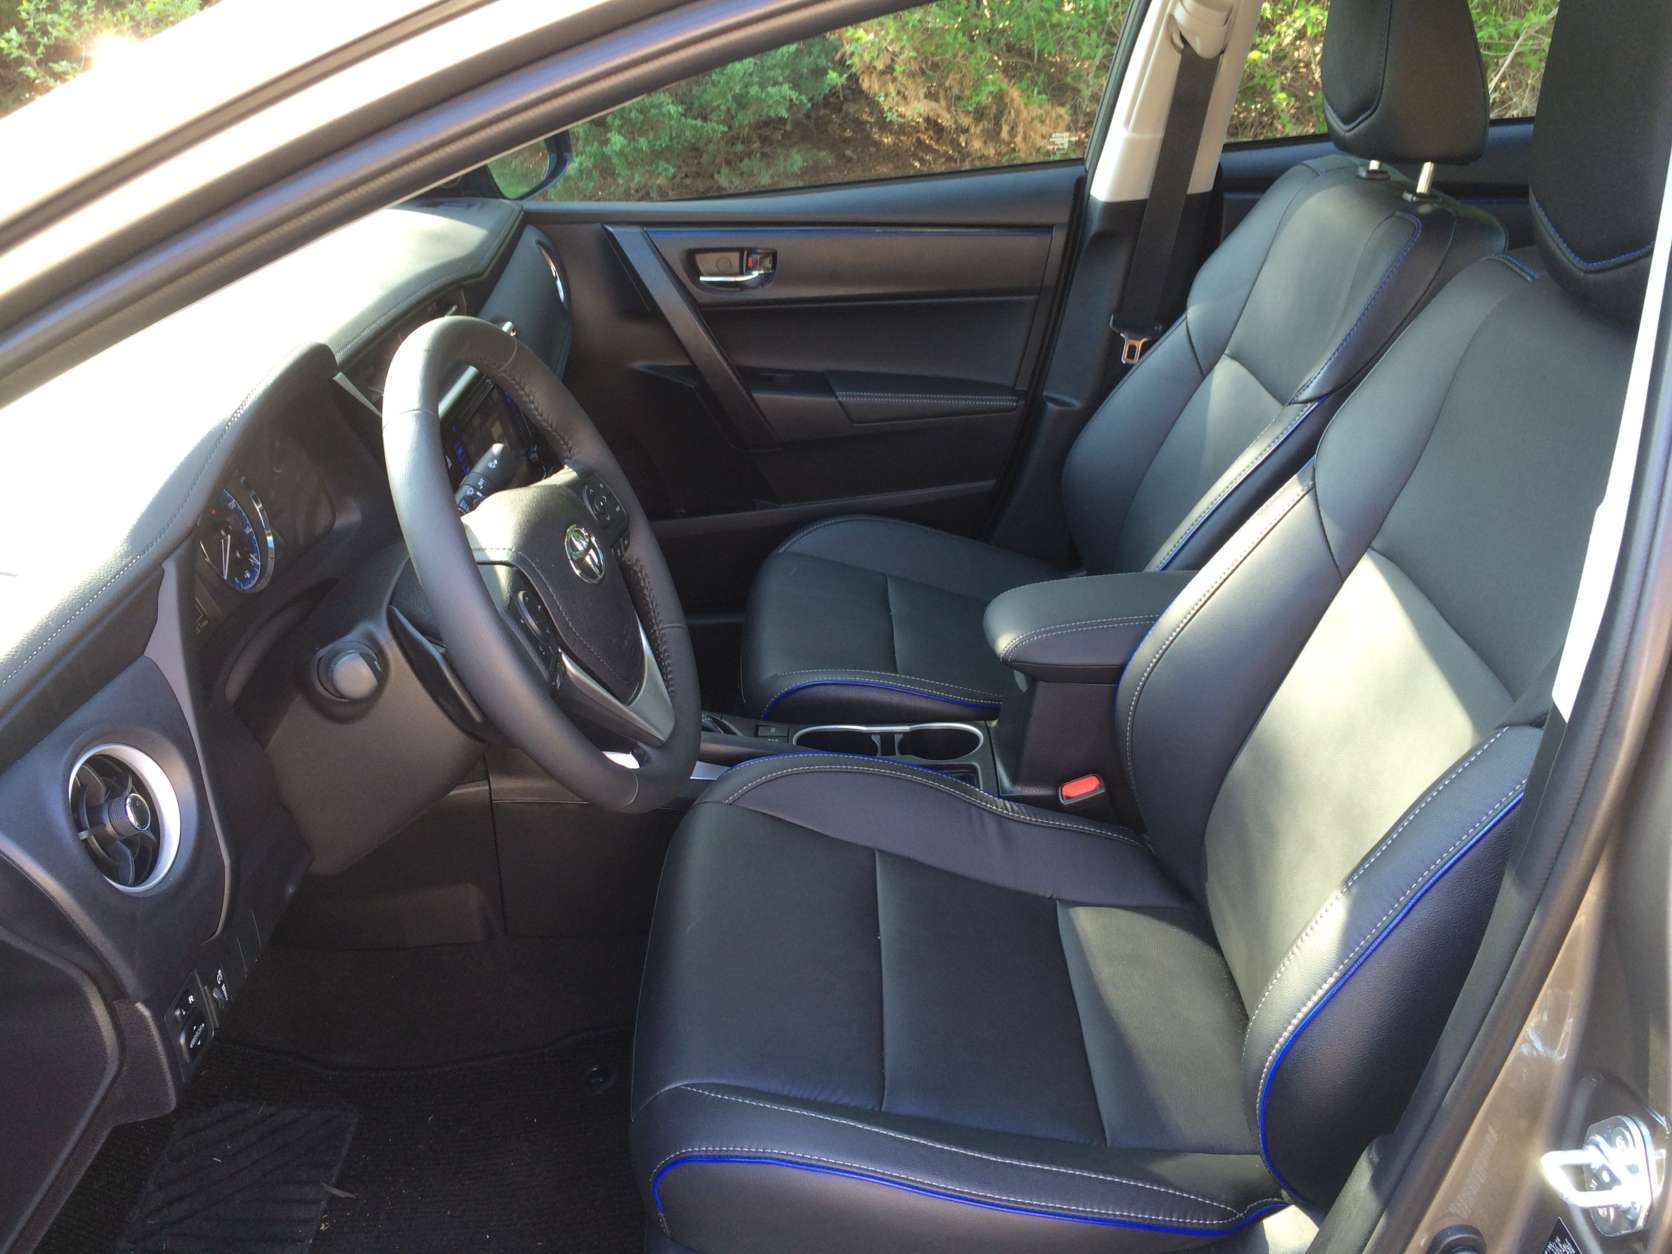 Blue stitching on the seats, dash and door trim pieces add a nice touch. The front seats are heated and the driver’s seat has eight-way power adjustments. (WTOP/Mike Parris) 